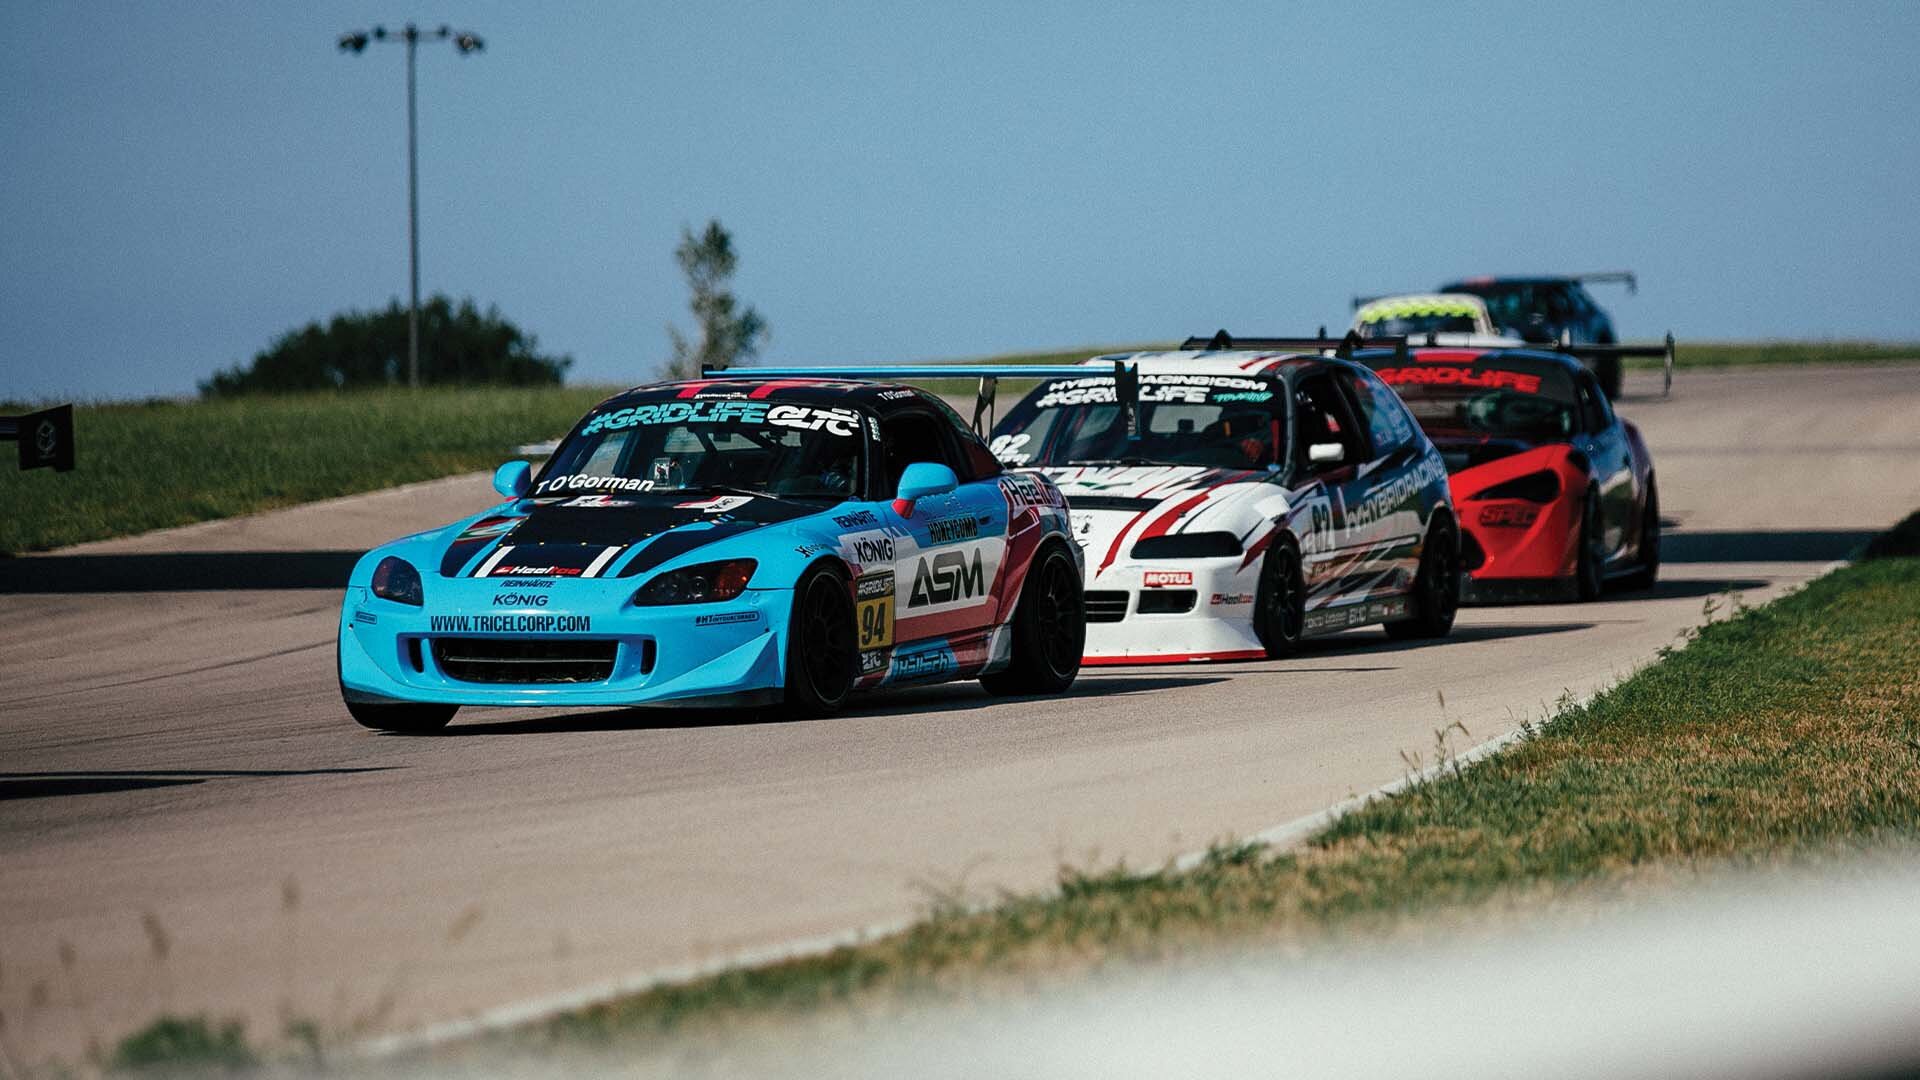  Contender Tom O’Gorman will enter the final round of the season without the characteristic cyan blue livery, after O’Gorman’s Honda S2000 was damaged in an accident while testing last week. He’ll be running the last four races of the season in teamm